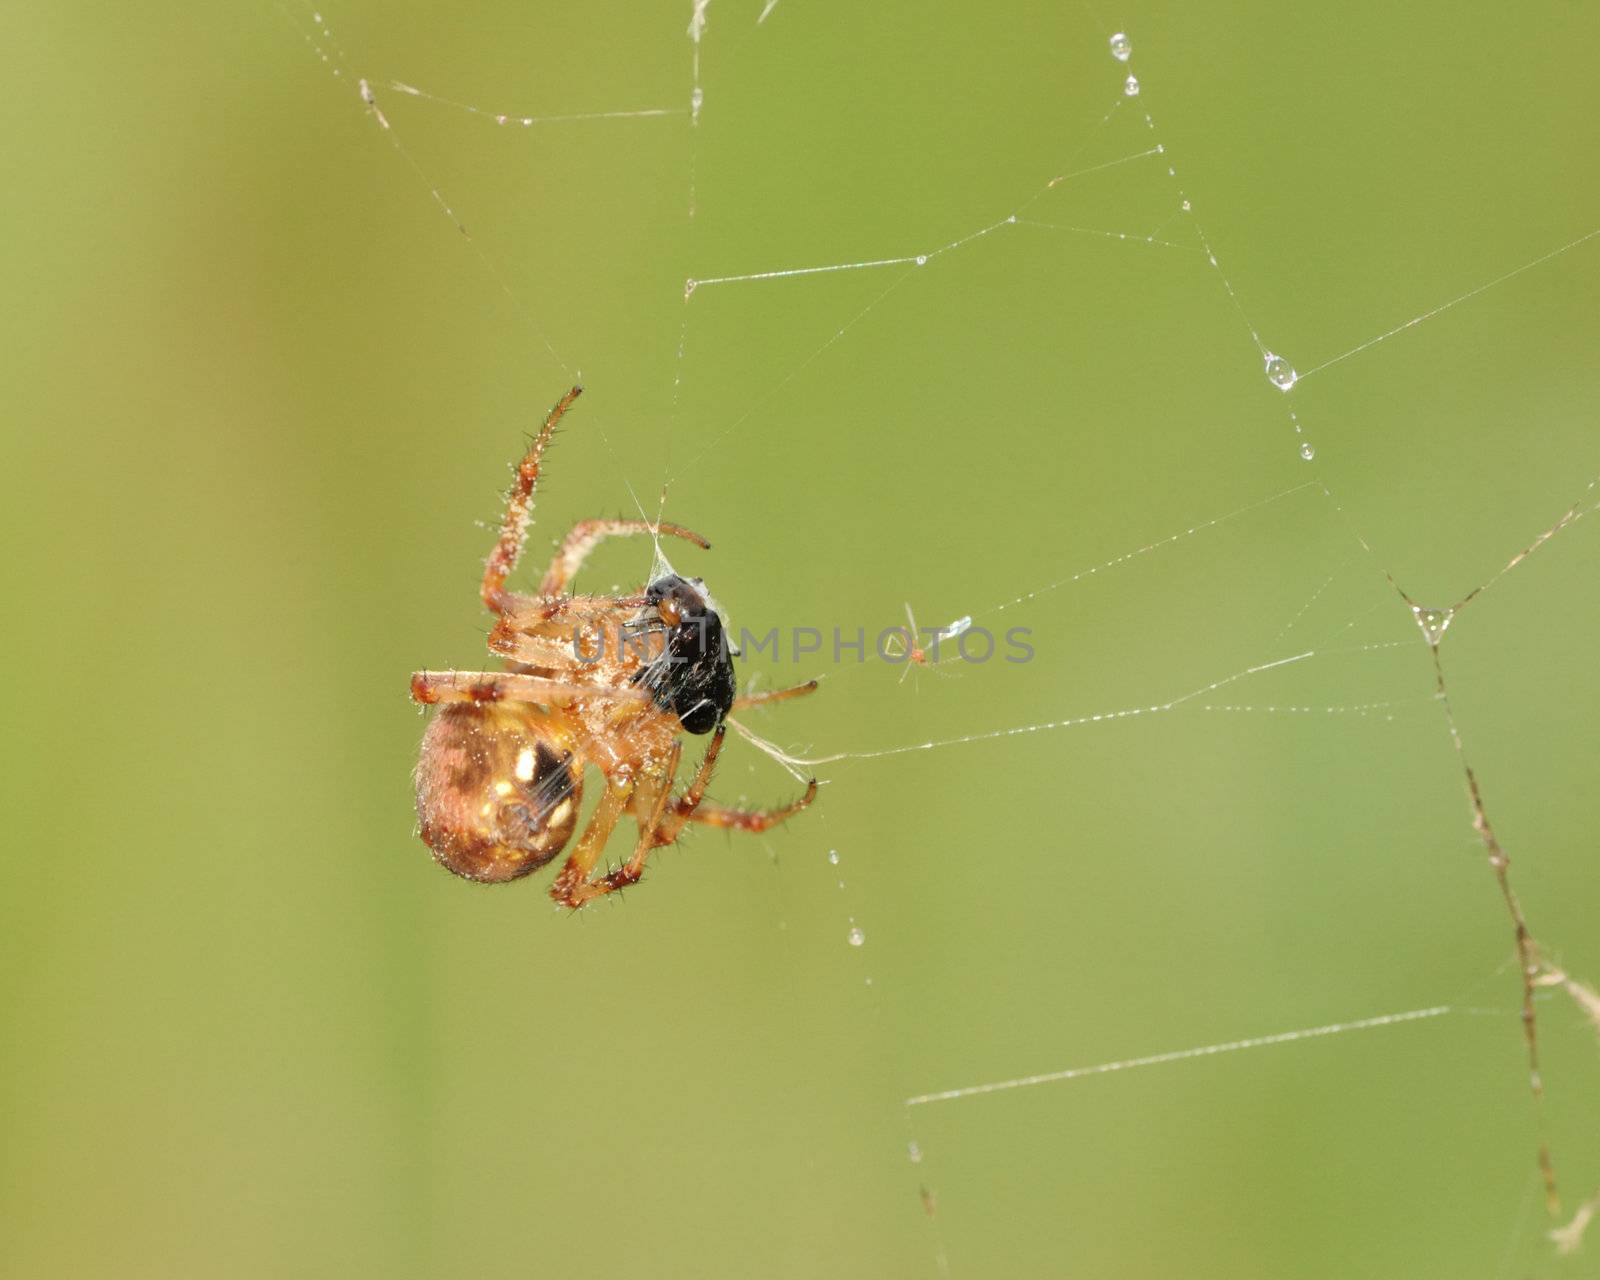 A garden spider with prey preparing to eat by wrapping the beetle in it's web.